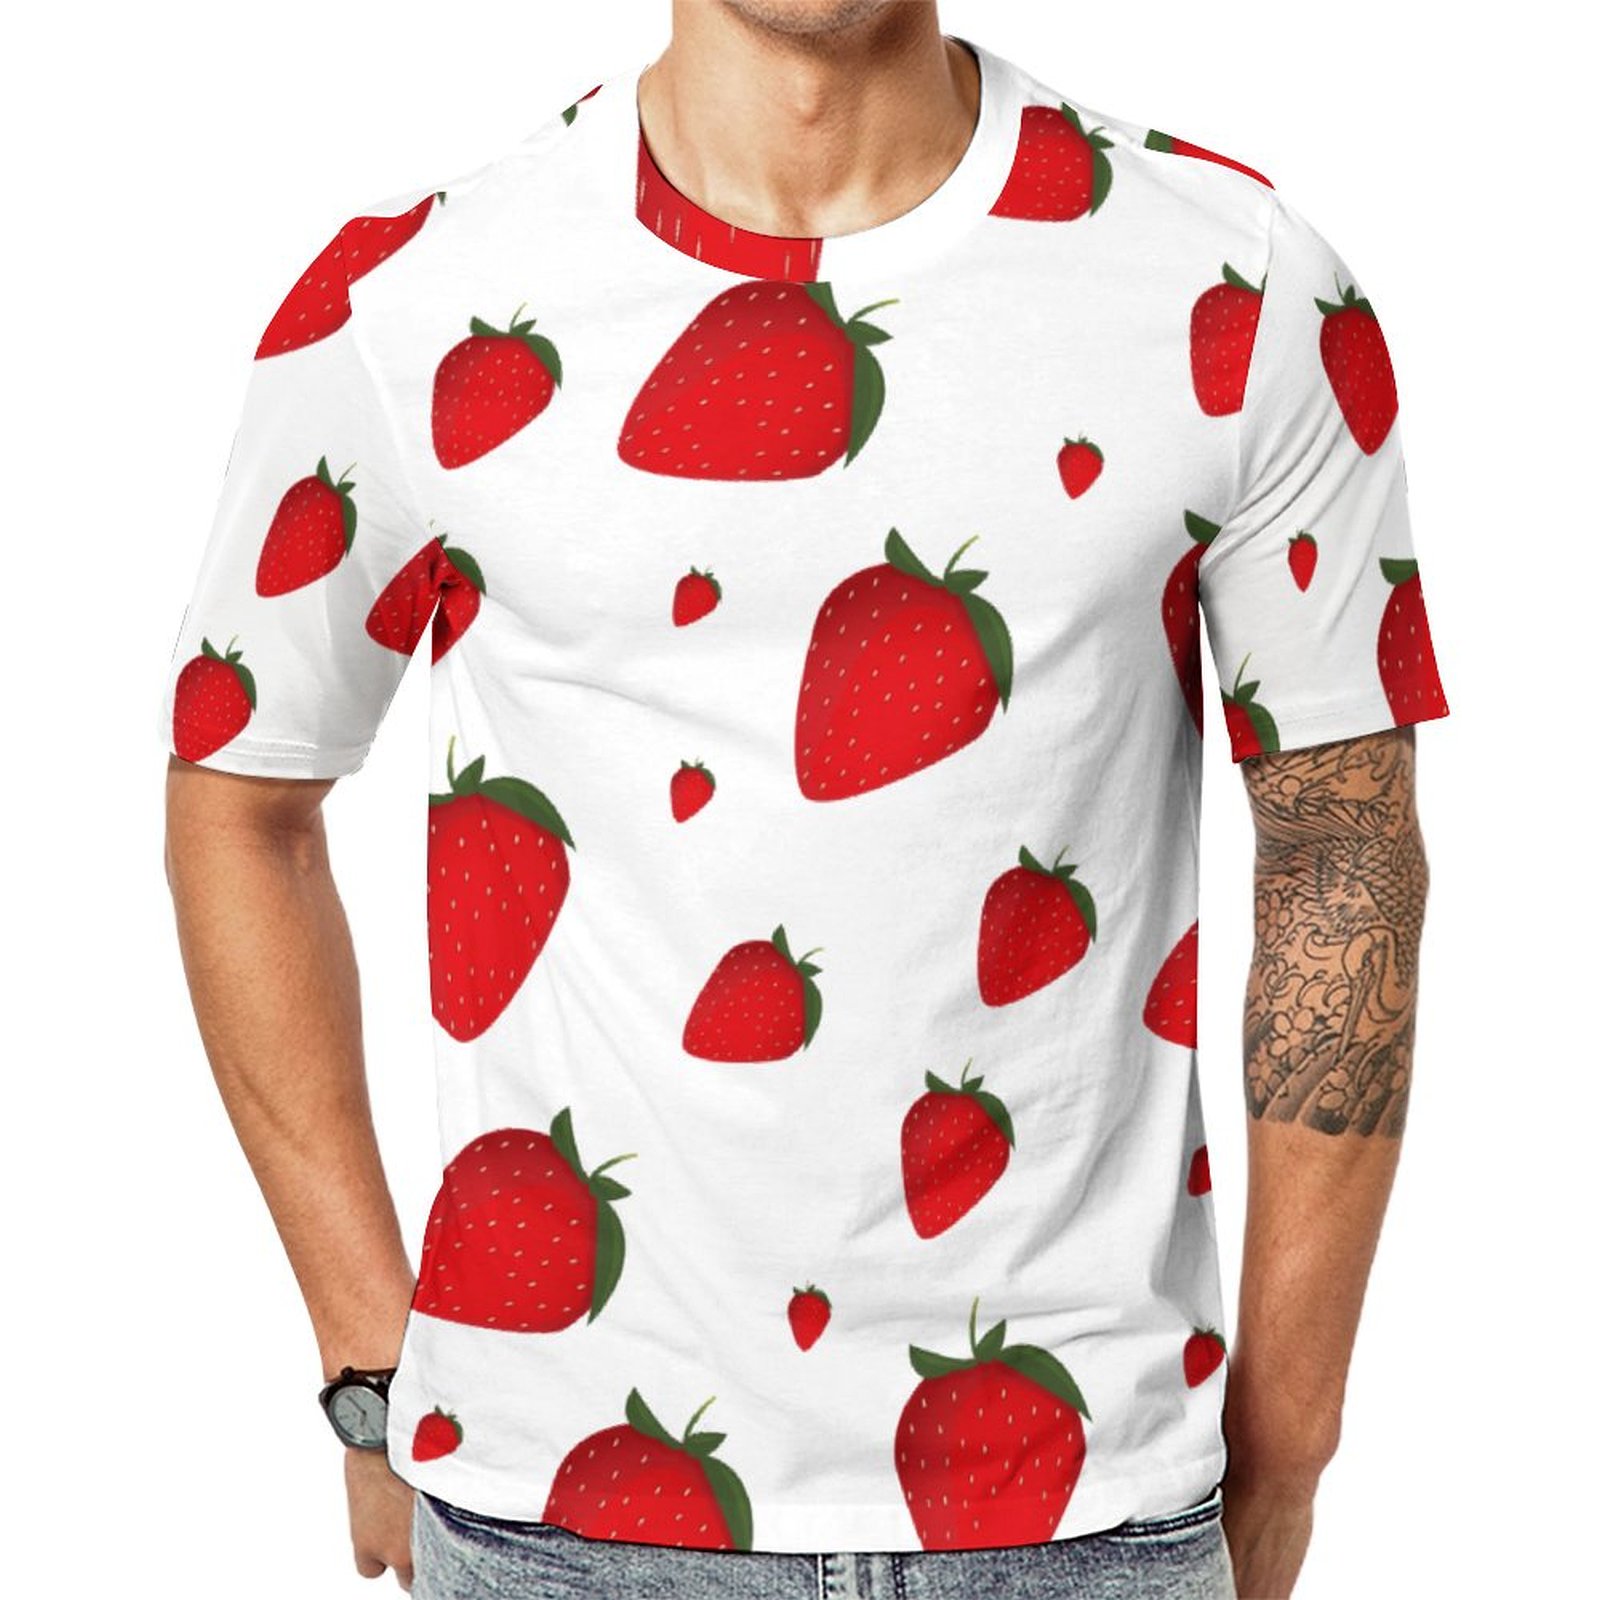 Food Red White Strawberry Fruit Short Sleeve Print Unisex Tshirt Summer Casual Tees for Men and Women Coolcoshirts